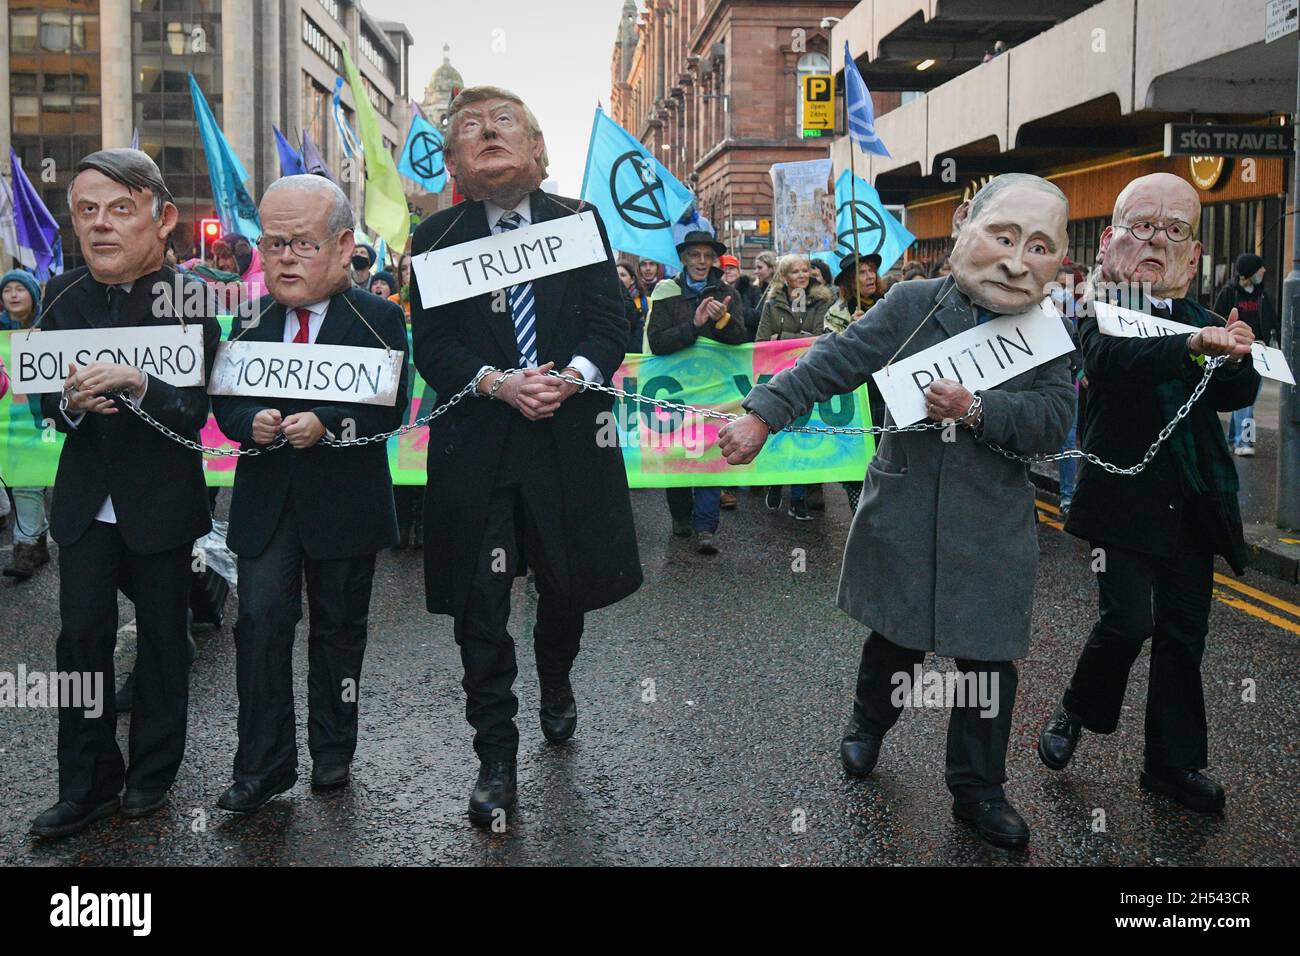 Glasgow Scotland, UK November 06 2021. The Global Day of Action takes place throughout the city with activists calling on governments to limit climate change to 1.5 degrees C. credit sst/alamy live news Stock Photo